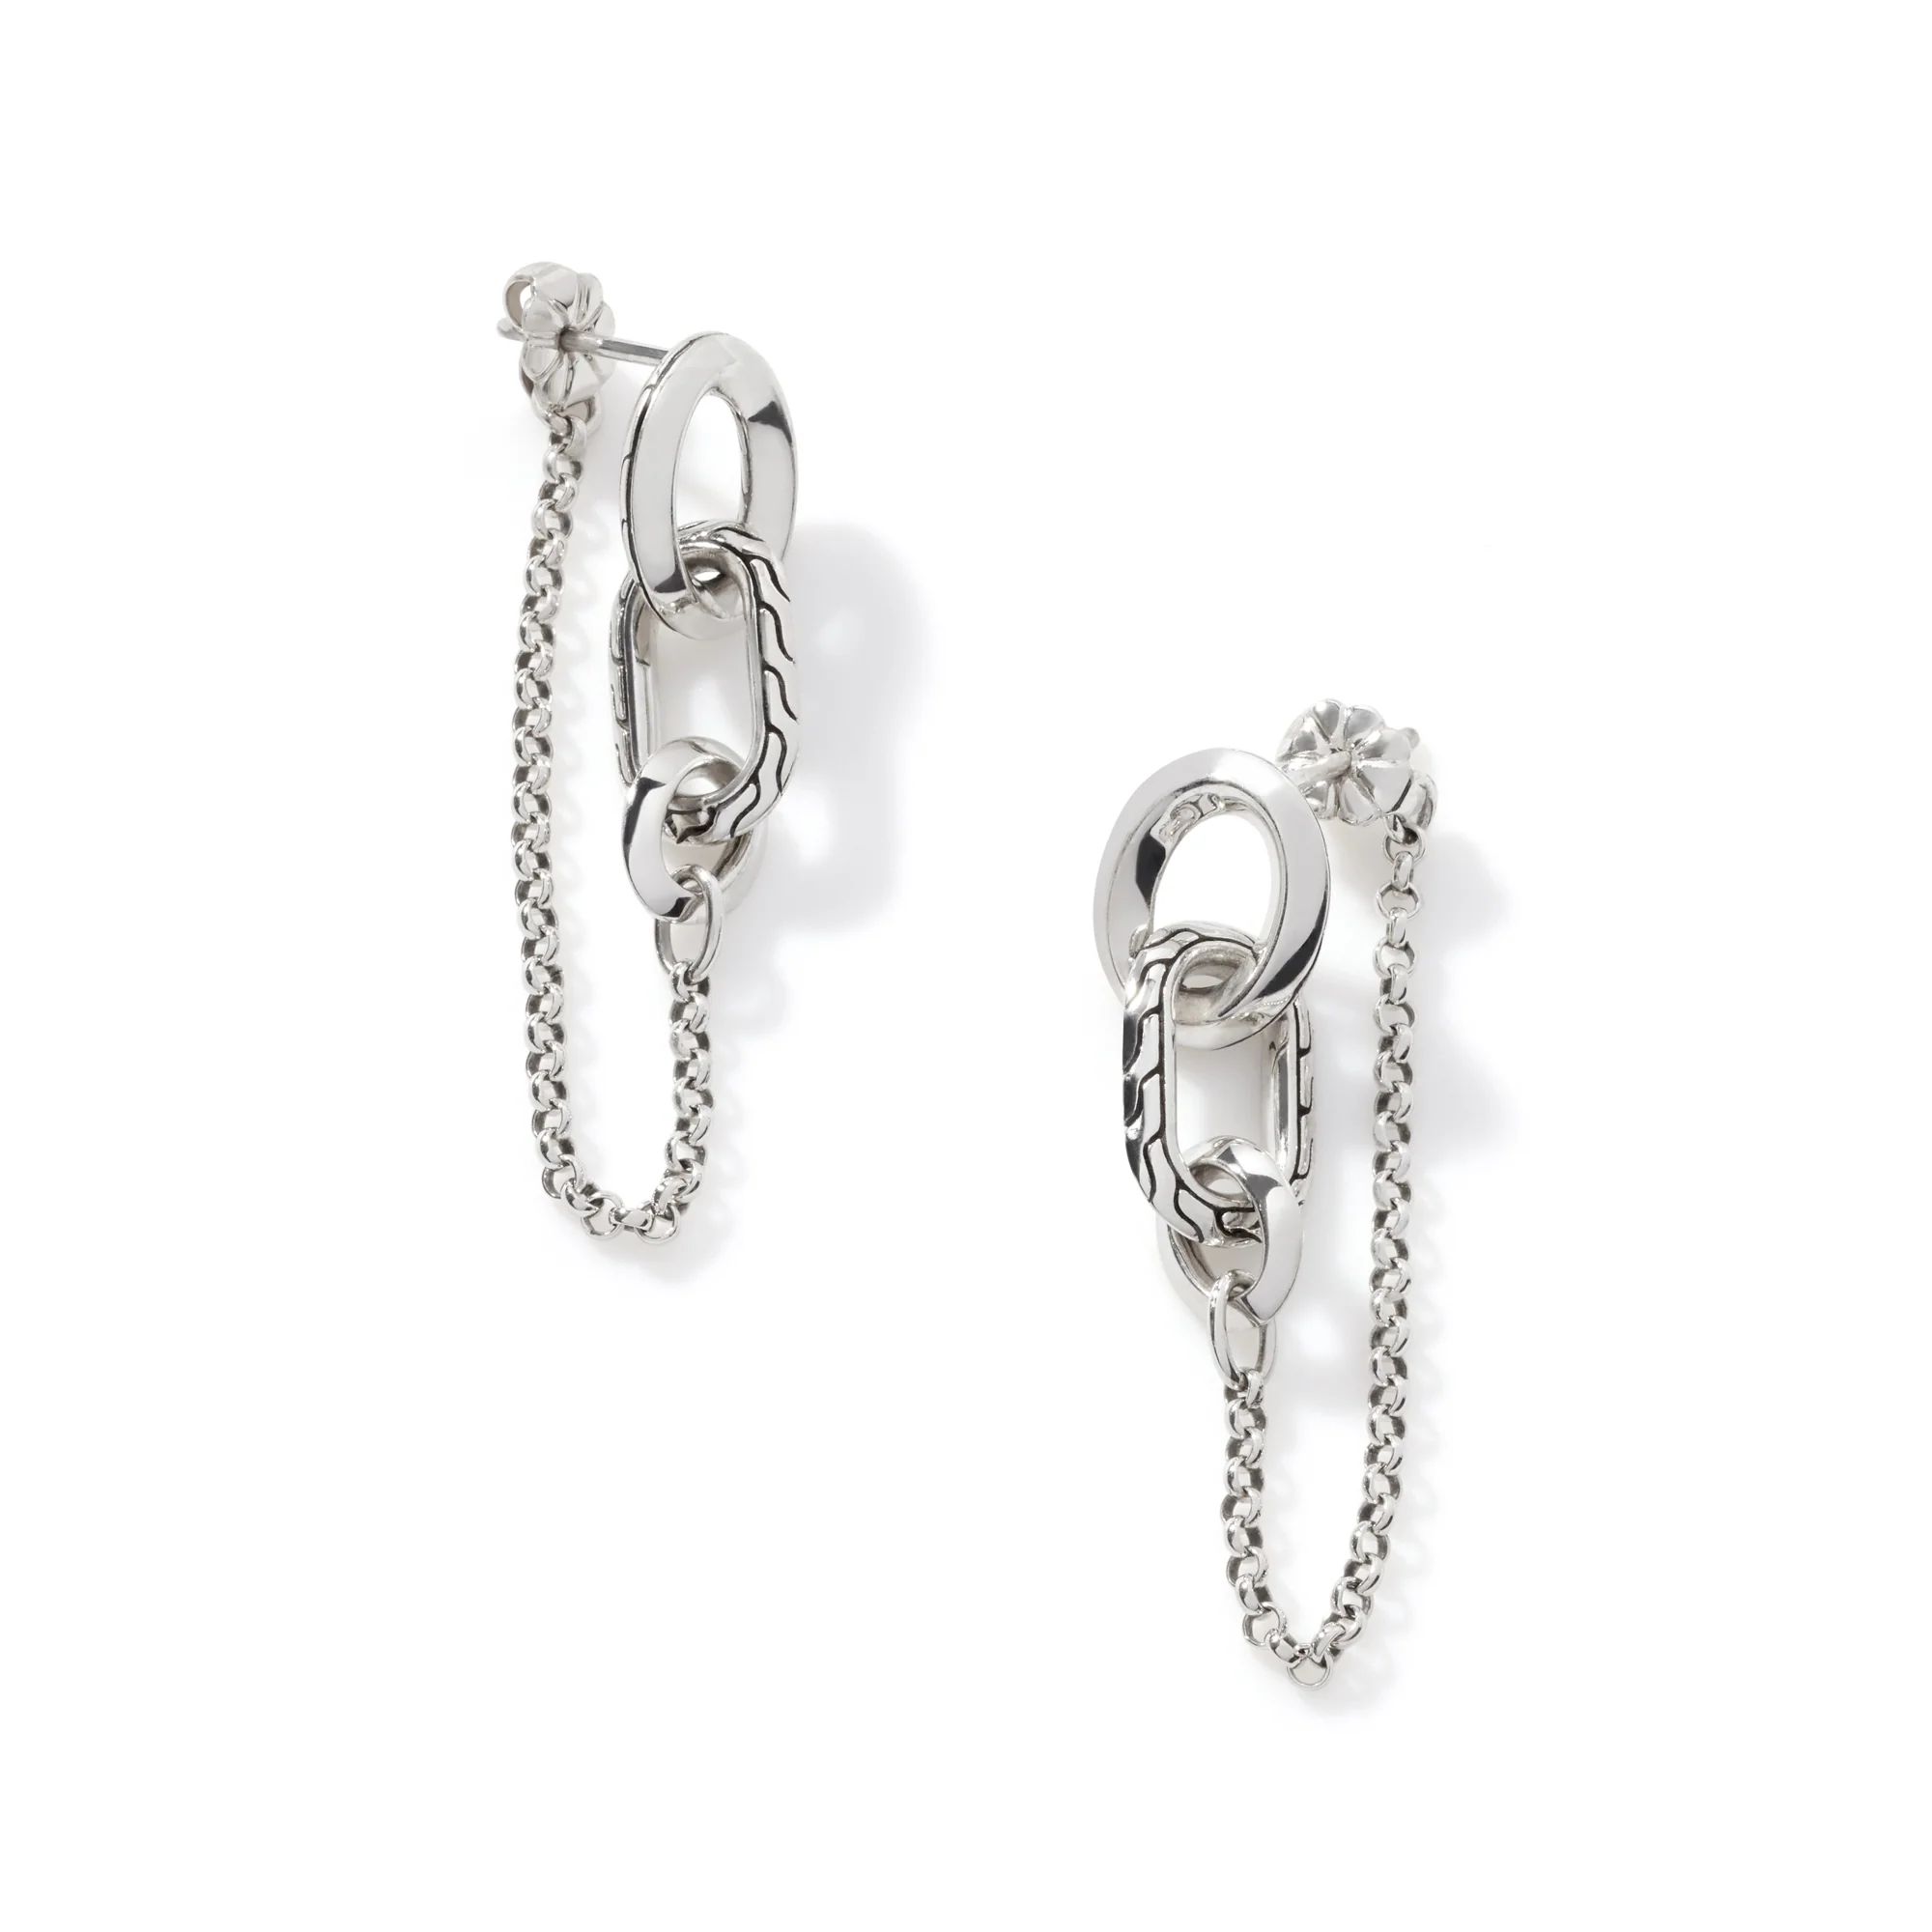 Carved Chain Drop Earring, Sterling Silver|EB900401 | John Hardy